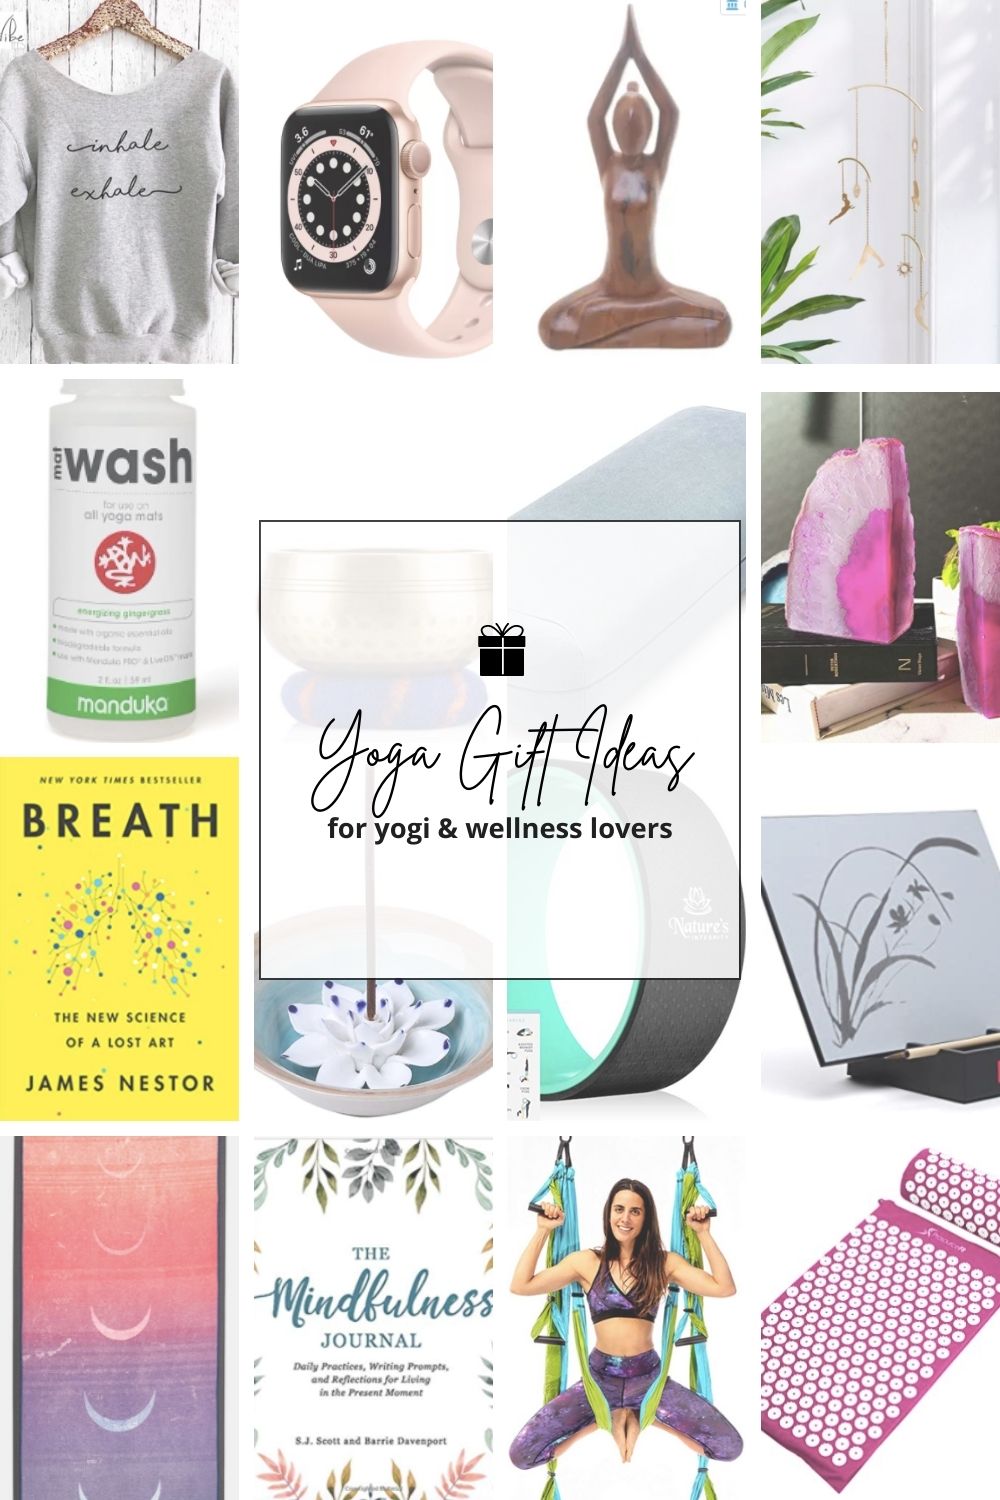 Yoga and Wellness Gift Guide, Over 50 Ideas! - Mommy Gone Healthy